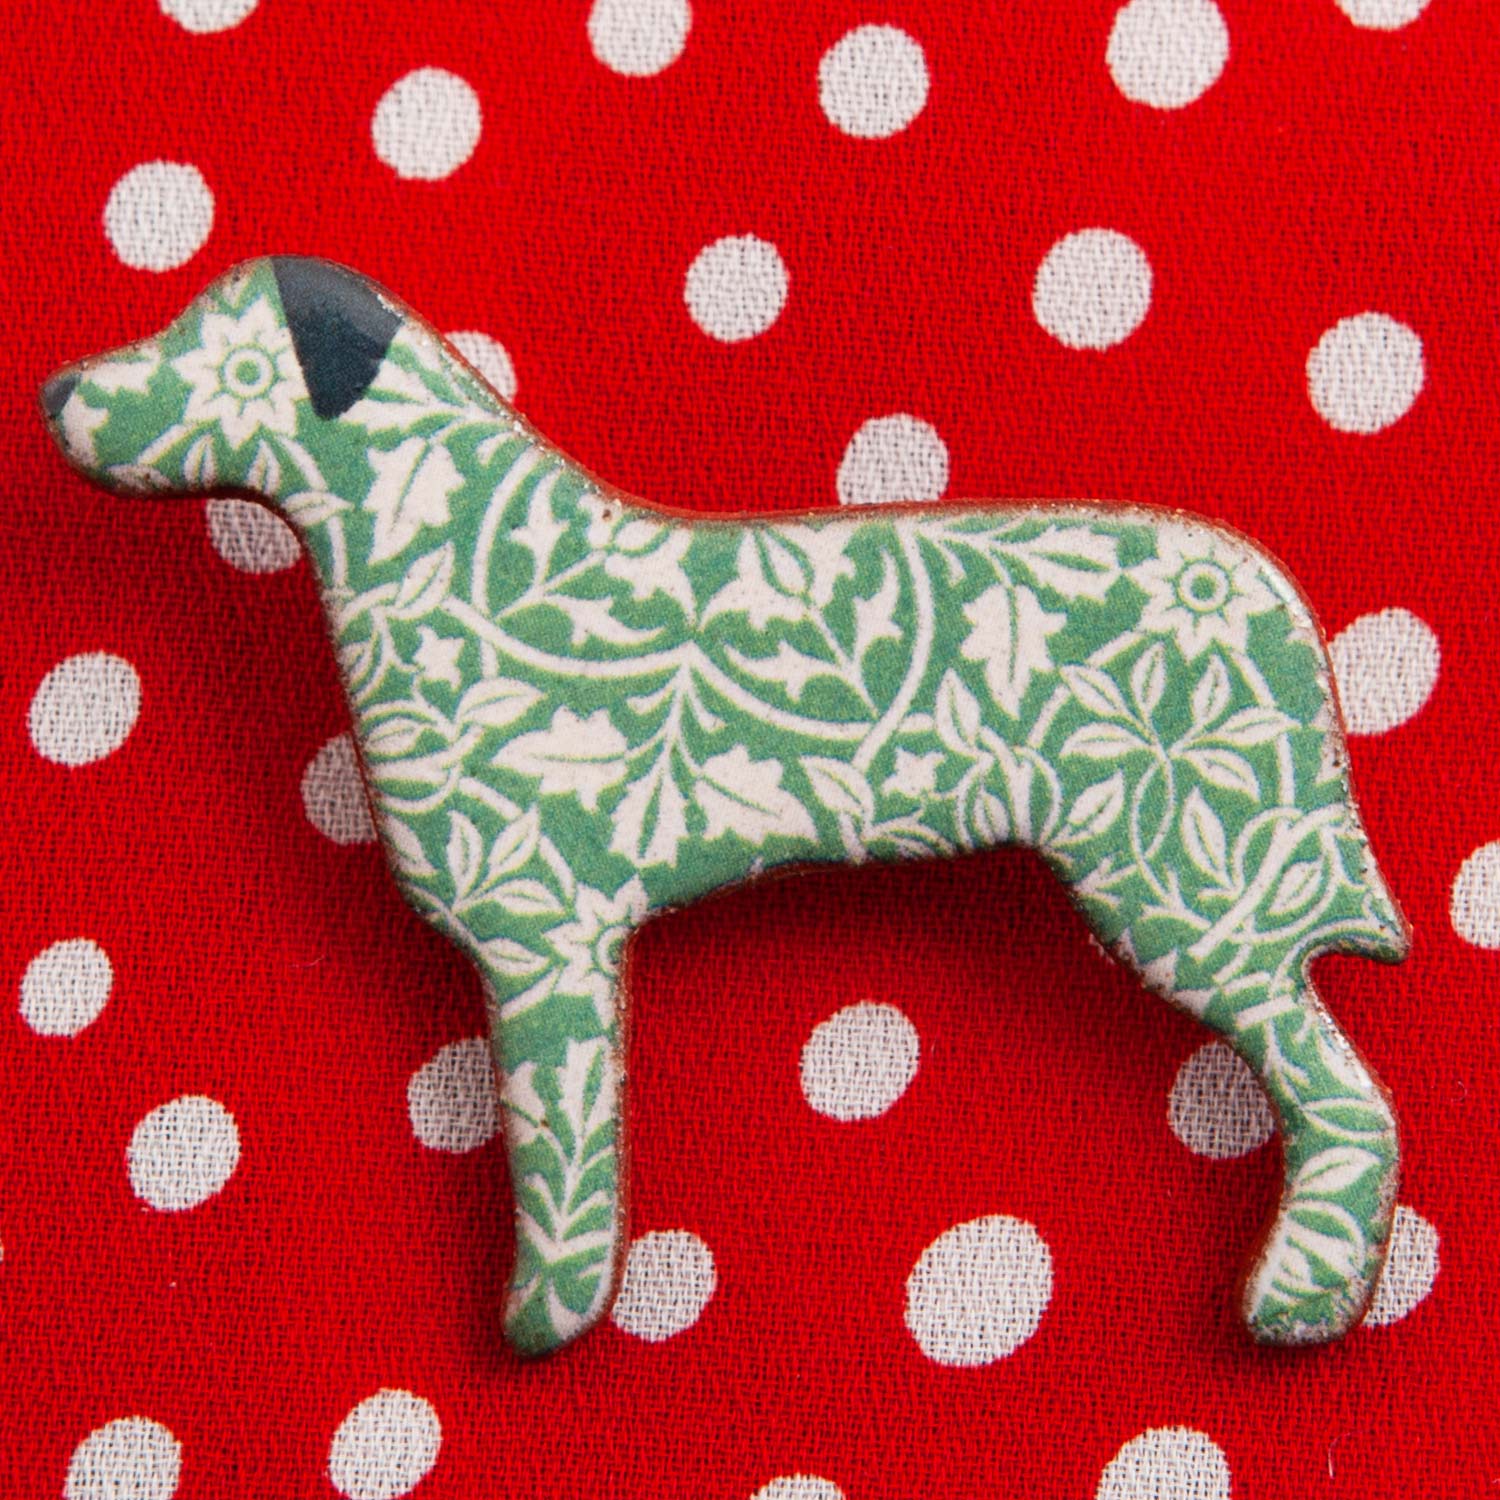 Dog Lover Gifts available at Dog Krazy Gifts – Ceramic Green William Morris Large Breed Brooch by Mary Goldberg of Stockwell Ceramics, Just Part Of Our Collection Of Dog Themed Gifts, Available At www.dogkrazygifts.co.uk